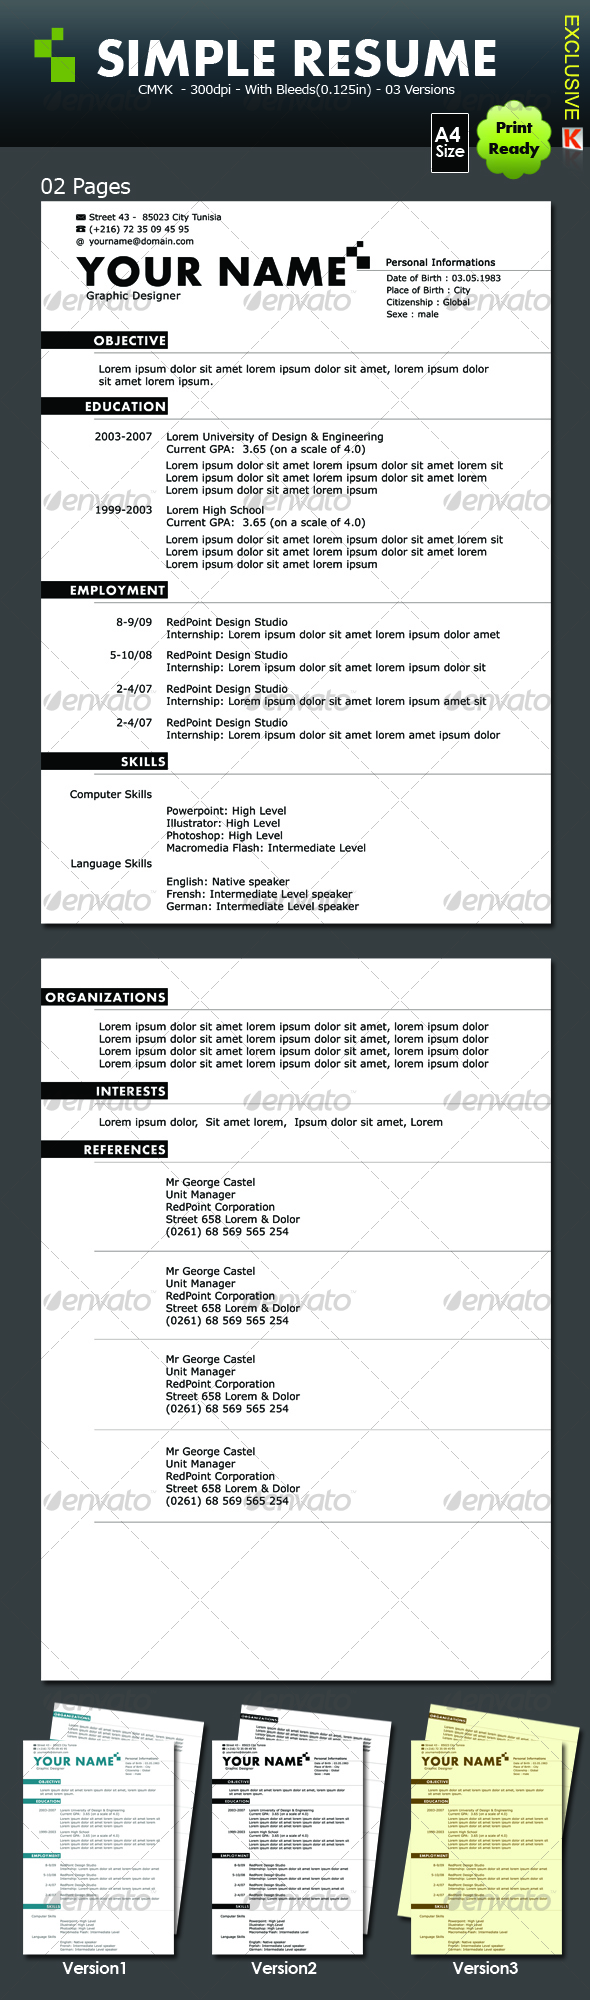 Simple Resume (02 pages & 03 versions)